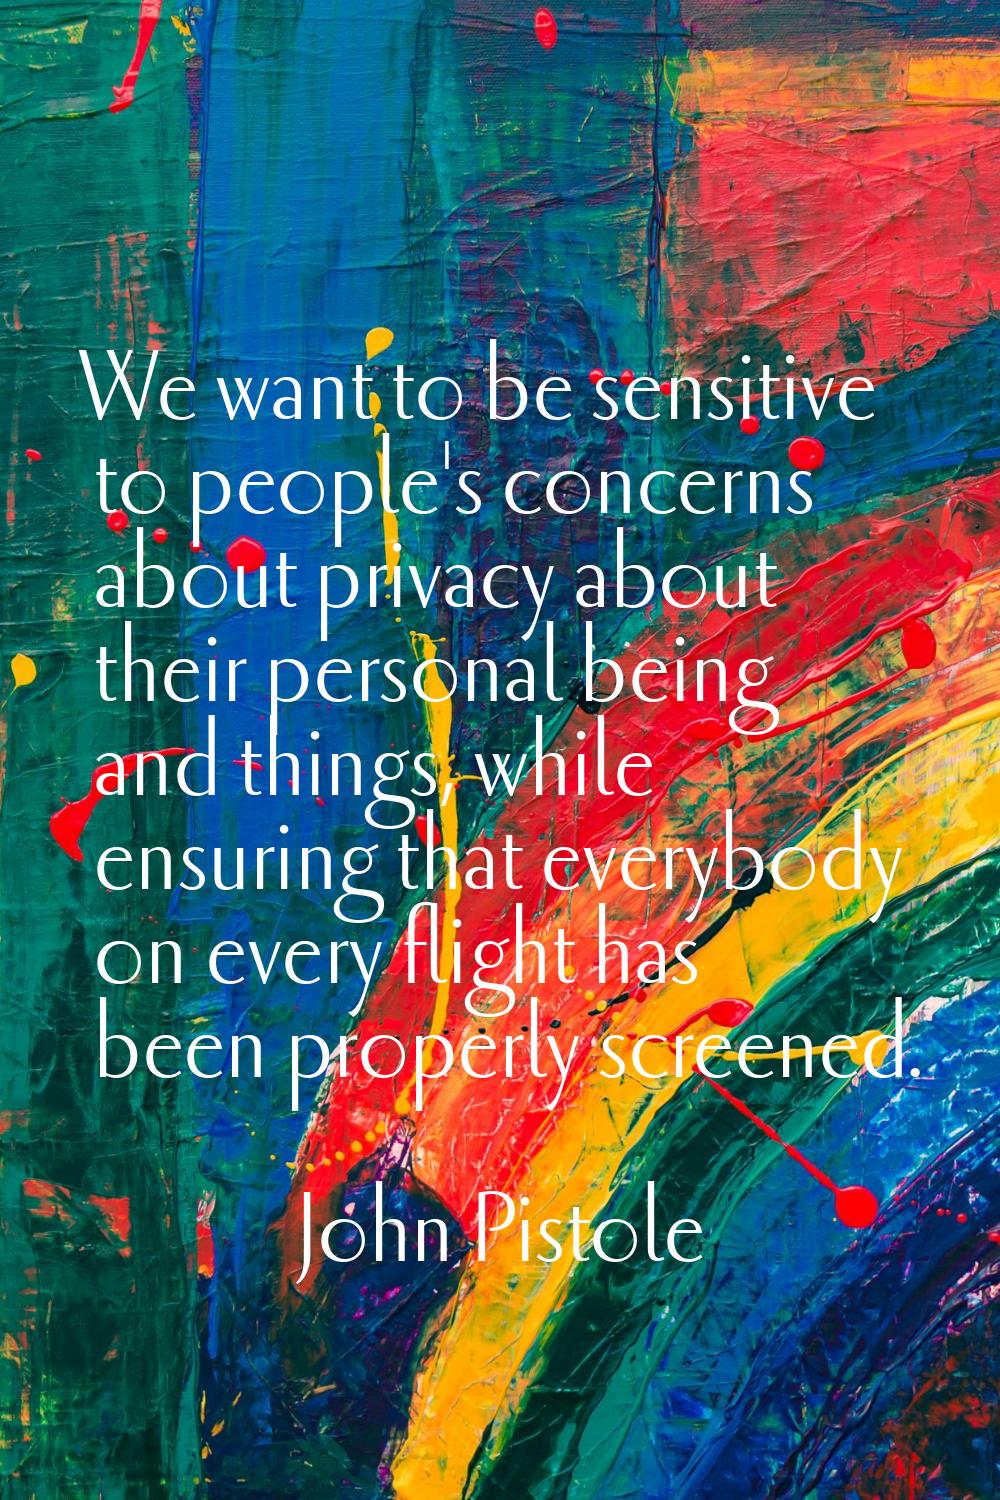 We want to be sensitive to people's concerns about privacy about their personal being and things, w